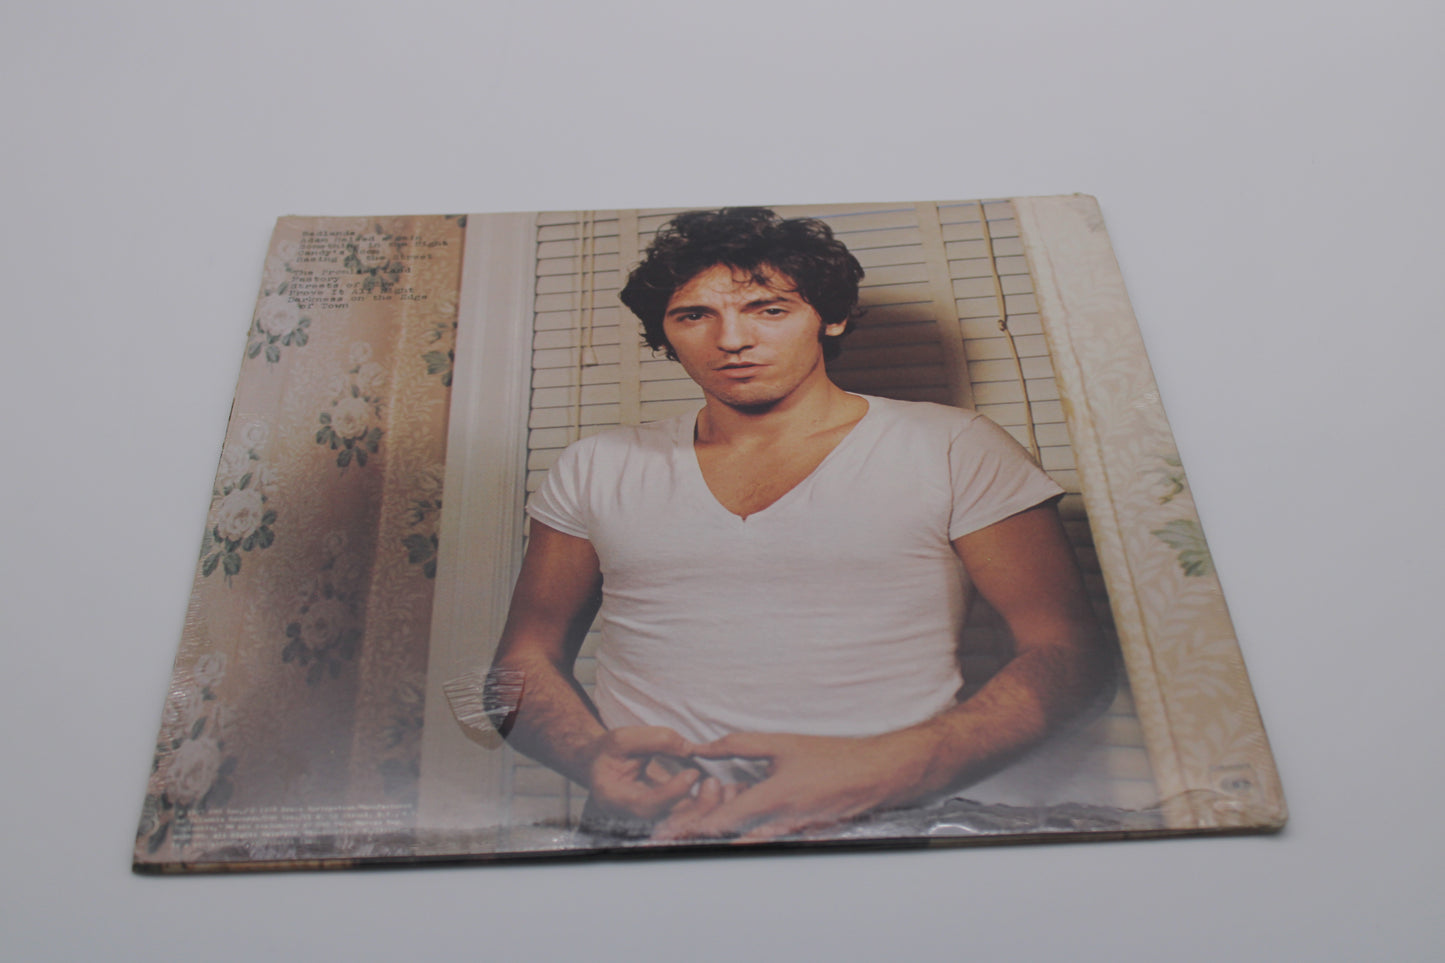 Bruce Springsteen Darkness on the Edge of Town - SEALED Vinyl 1978 Hype Sticker: Badlands